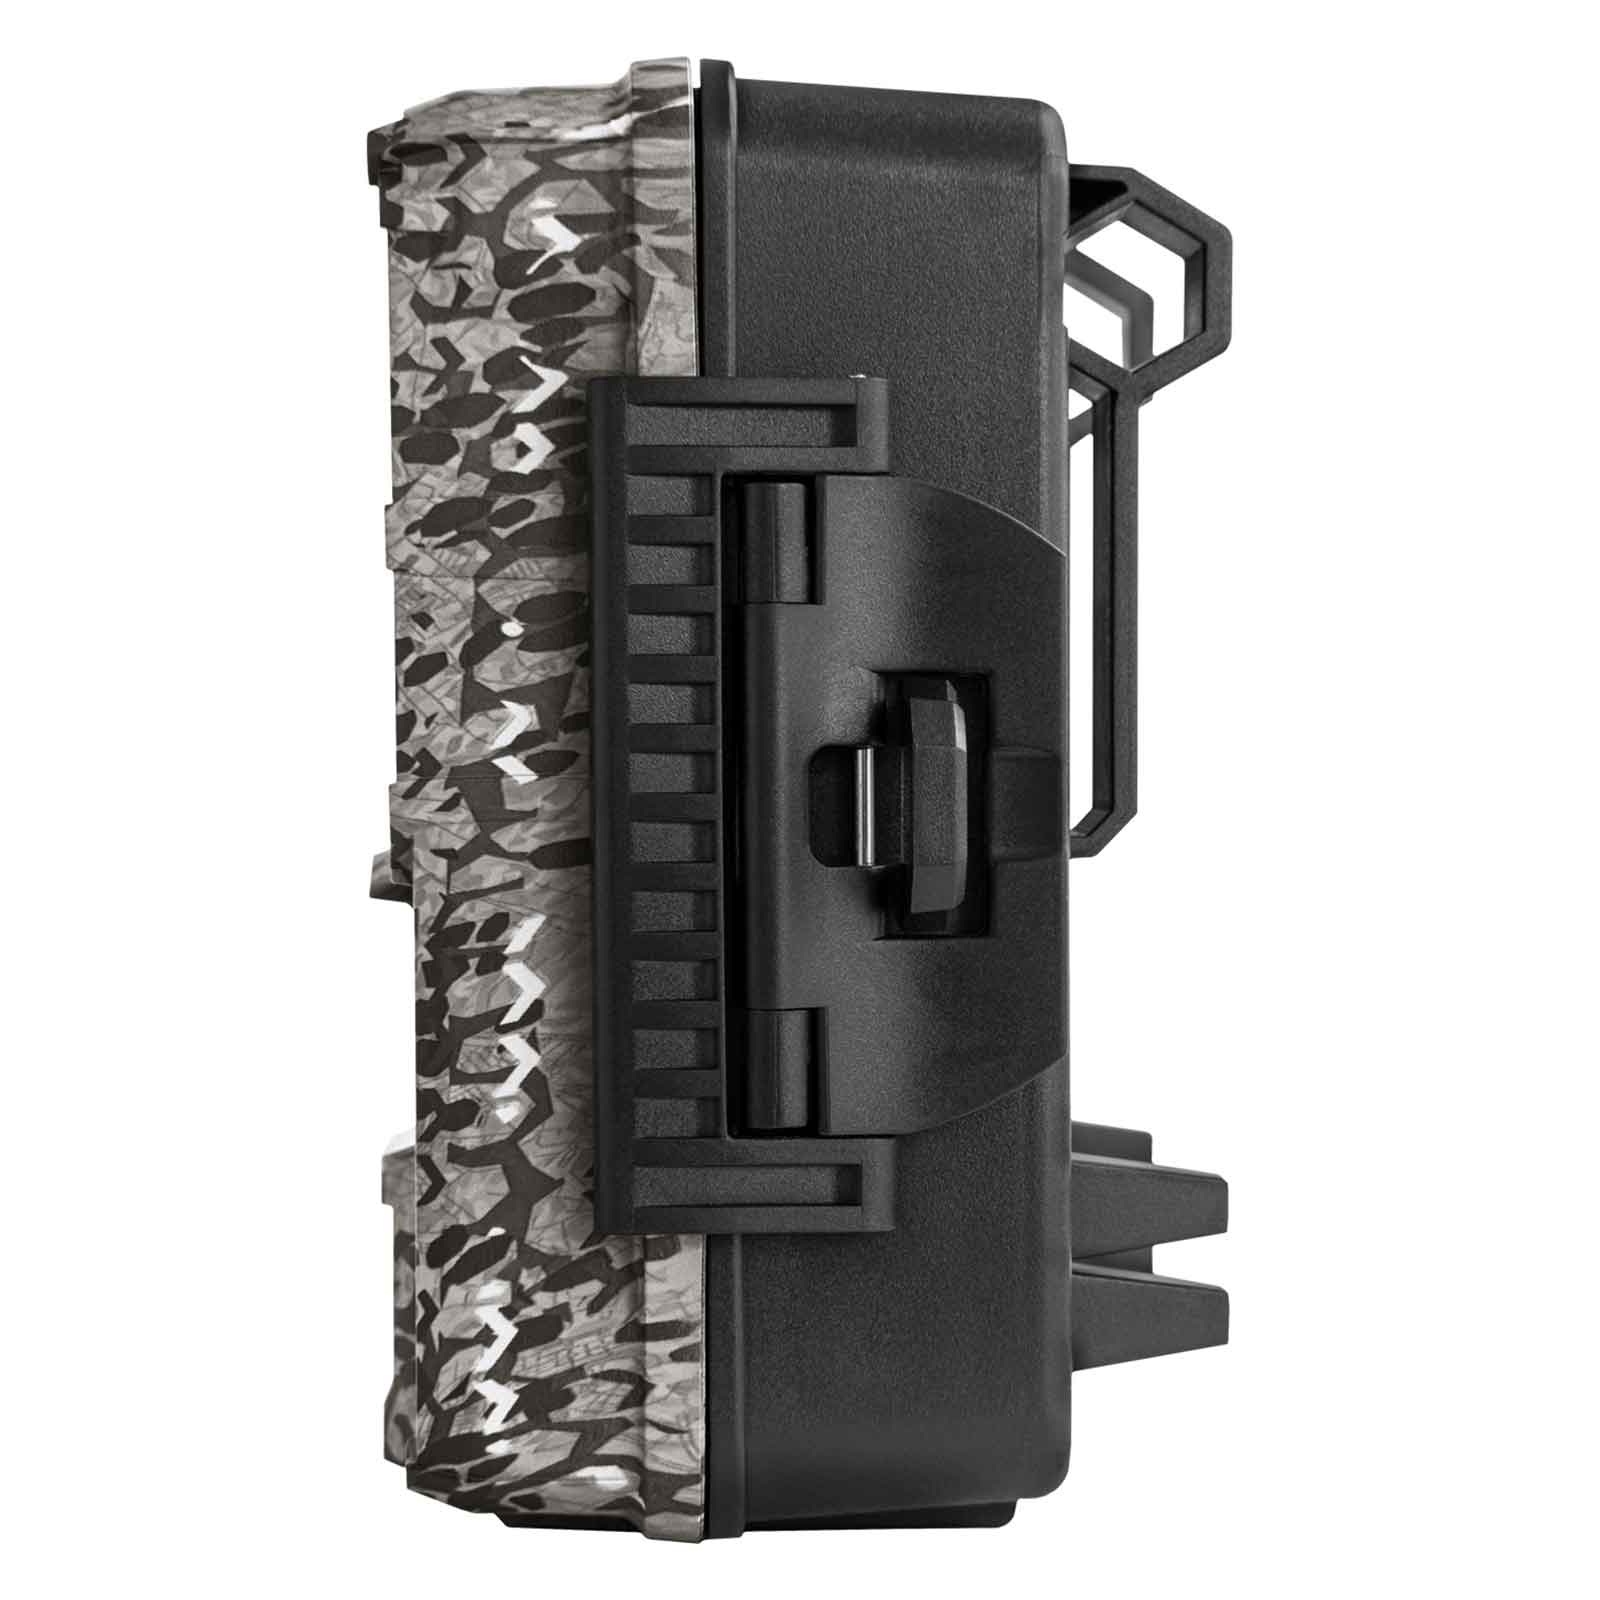 Camera de chasse Spypoint Force-Pro